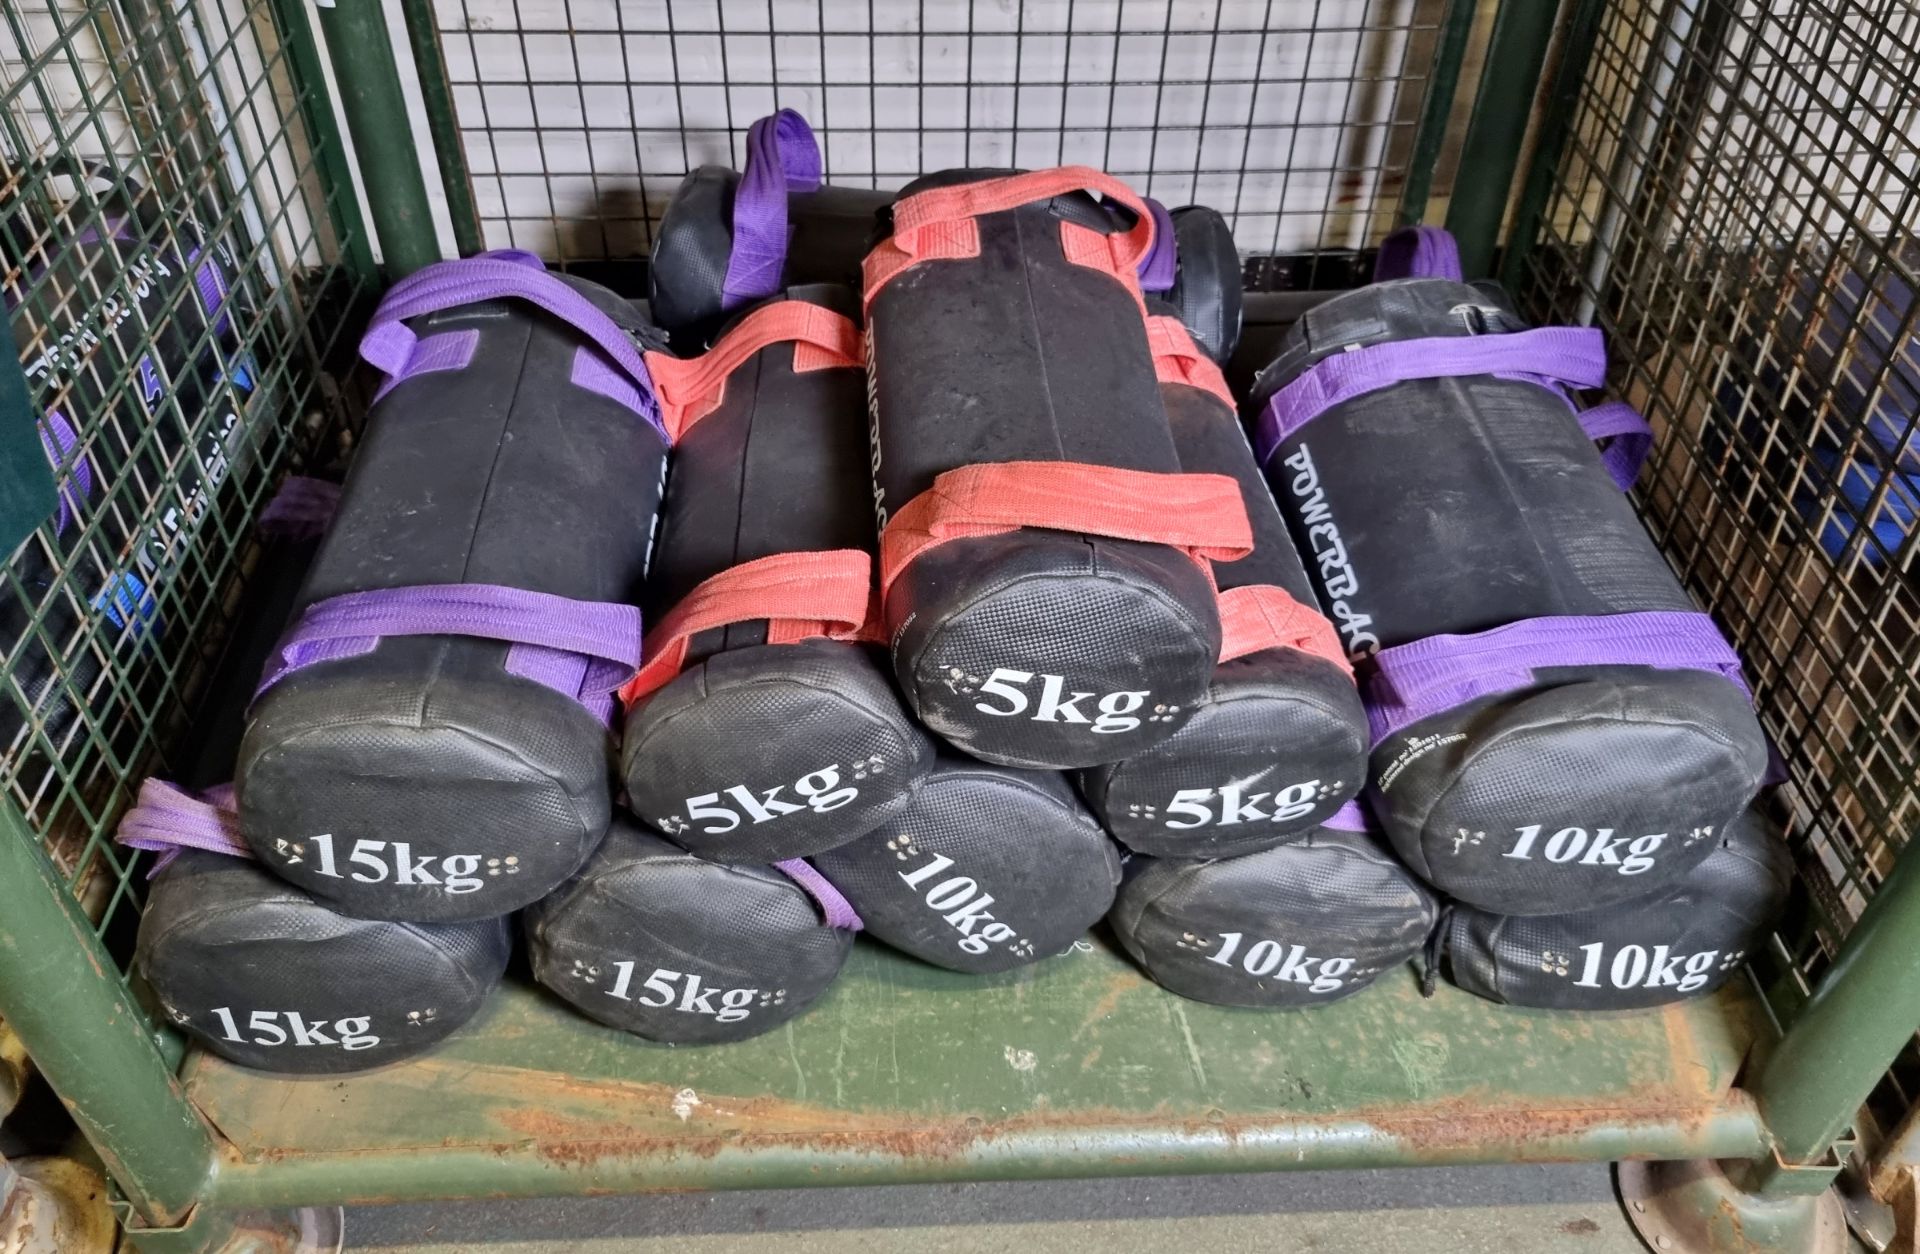 13x exercise powerbags - 3x 5kg, 7x 10kg, 3x 15kg - Image 2 of 2